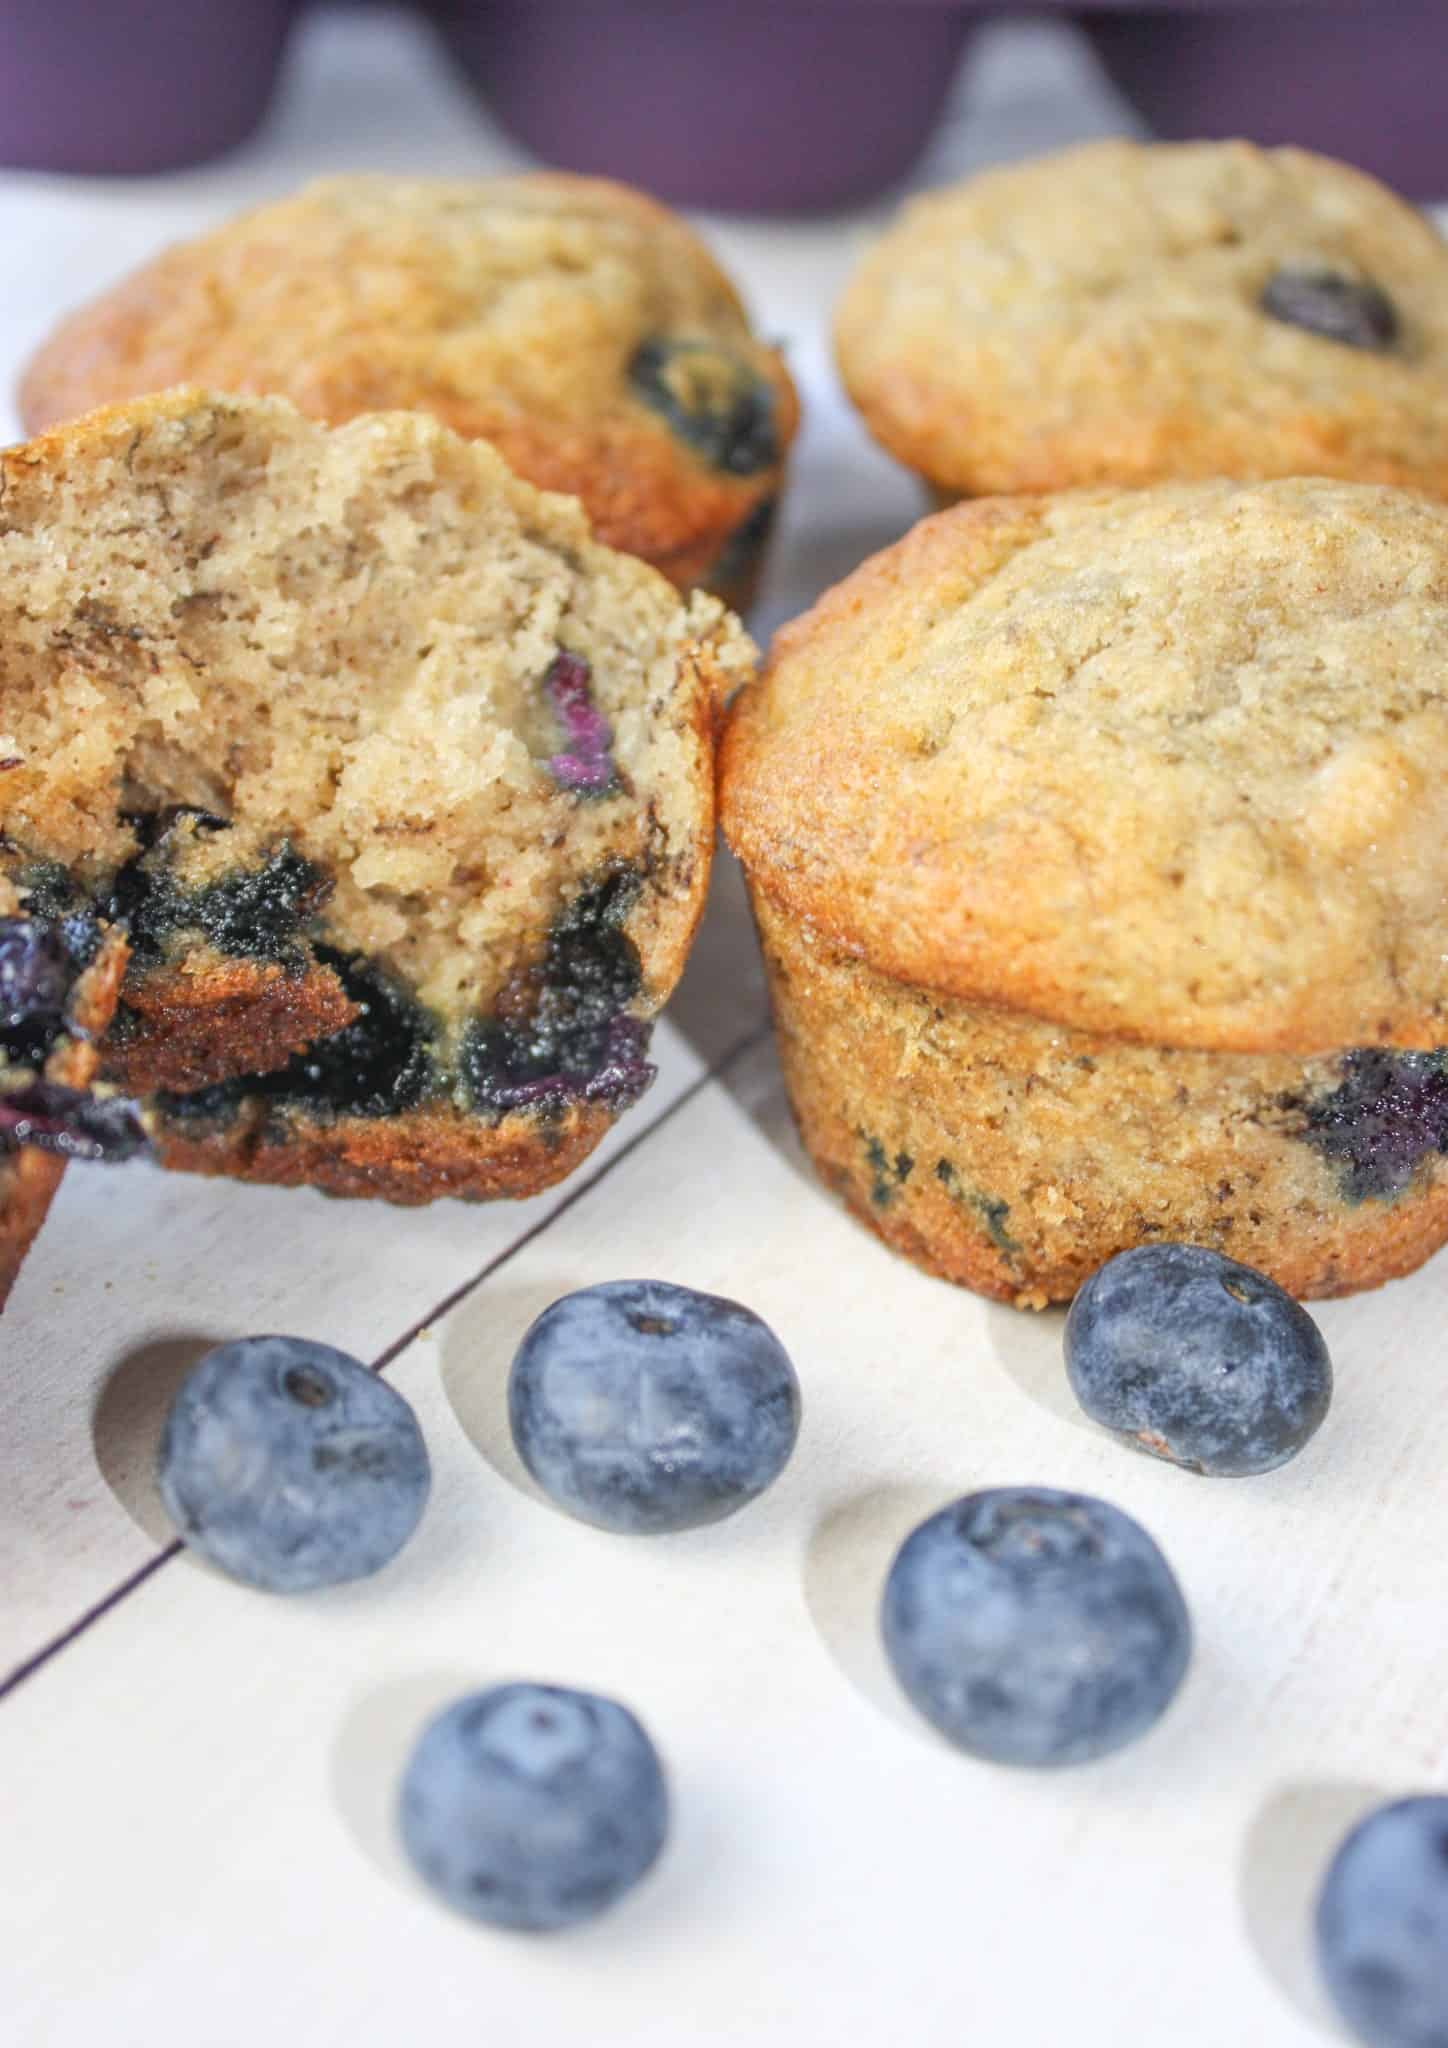 Blueberry Banana Muffins are a tasty seasonal twist on traditional banana muffins.  This moist and delicious gluten free snack is loaded with fresh blueberries.